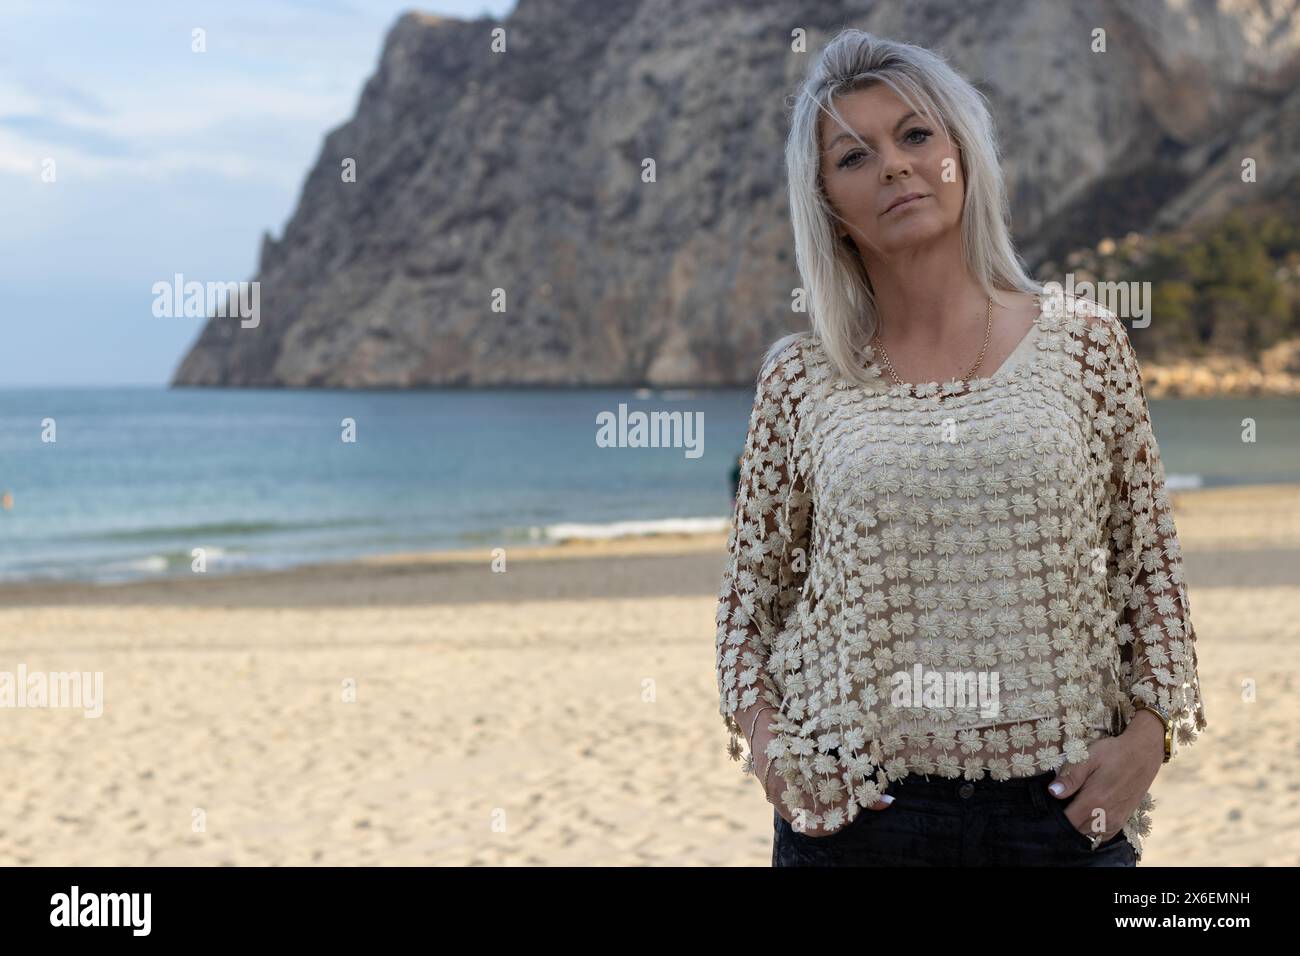 This portrait captures the serene beauty of a woman on the sun-kissed beaches of Calpe, Spain. Stock Photo